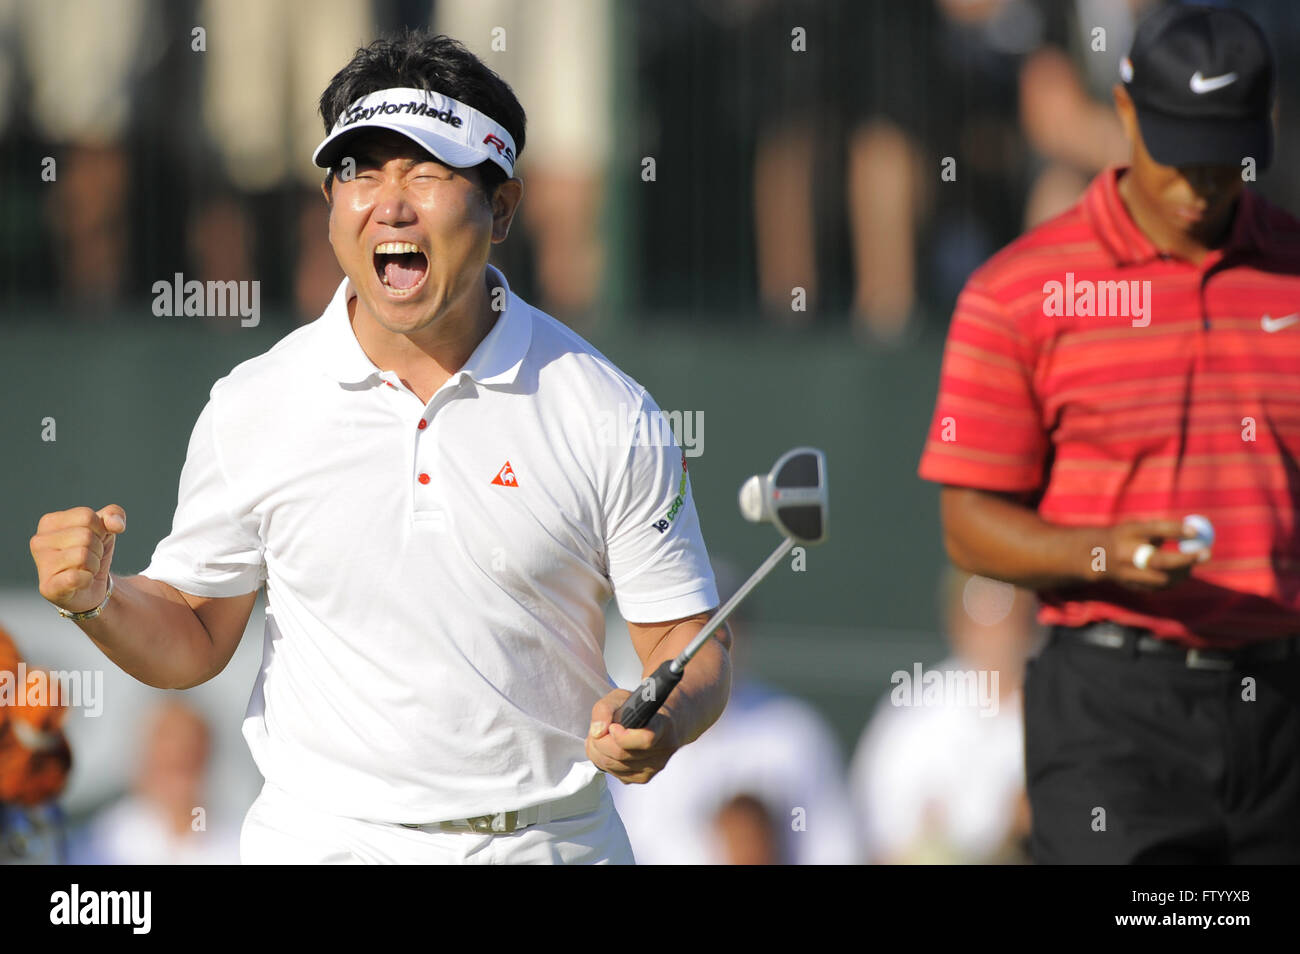 Chaska, MN, UNITED STATES. 16th Aug, 2009. Y.E. Yang of Korea, left, celebrates after making a birdie putt on the 18th green to win the 2009 PGA Championship as Tiger Woods (USA), right, looks down at his ball at Hazeltine National Golf Club on Aug 16, 2009 in Chaska, MN.ZUMA Press/Scott A. Miller © Scott A. Miller/ZUMA Wire/Alamy Live News Stock Photo